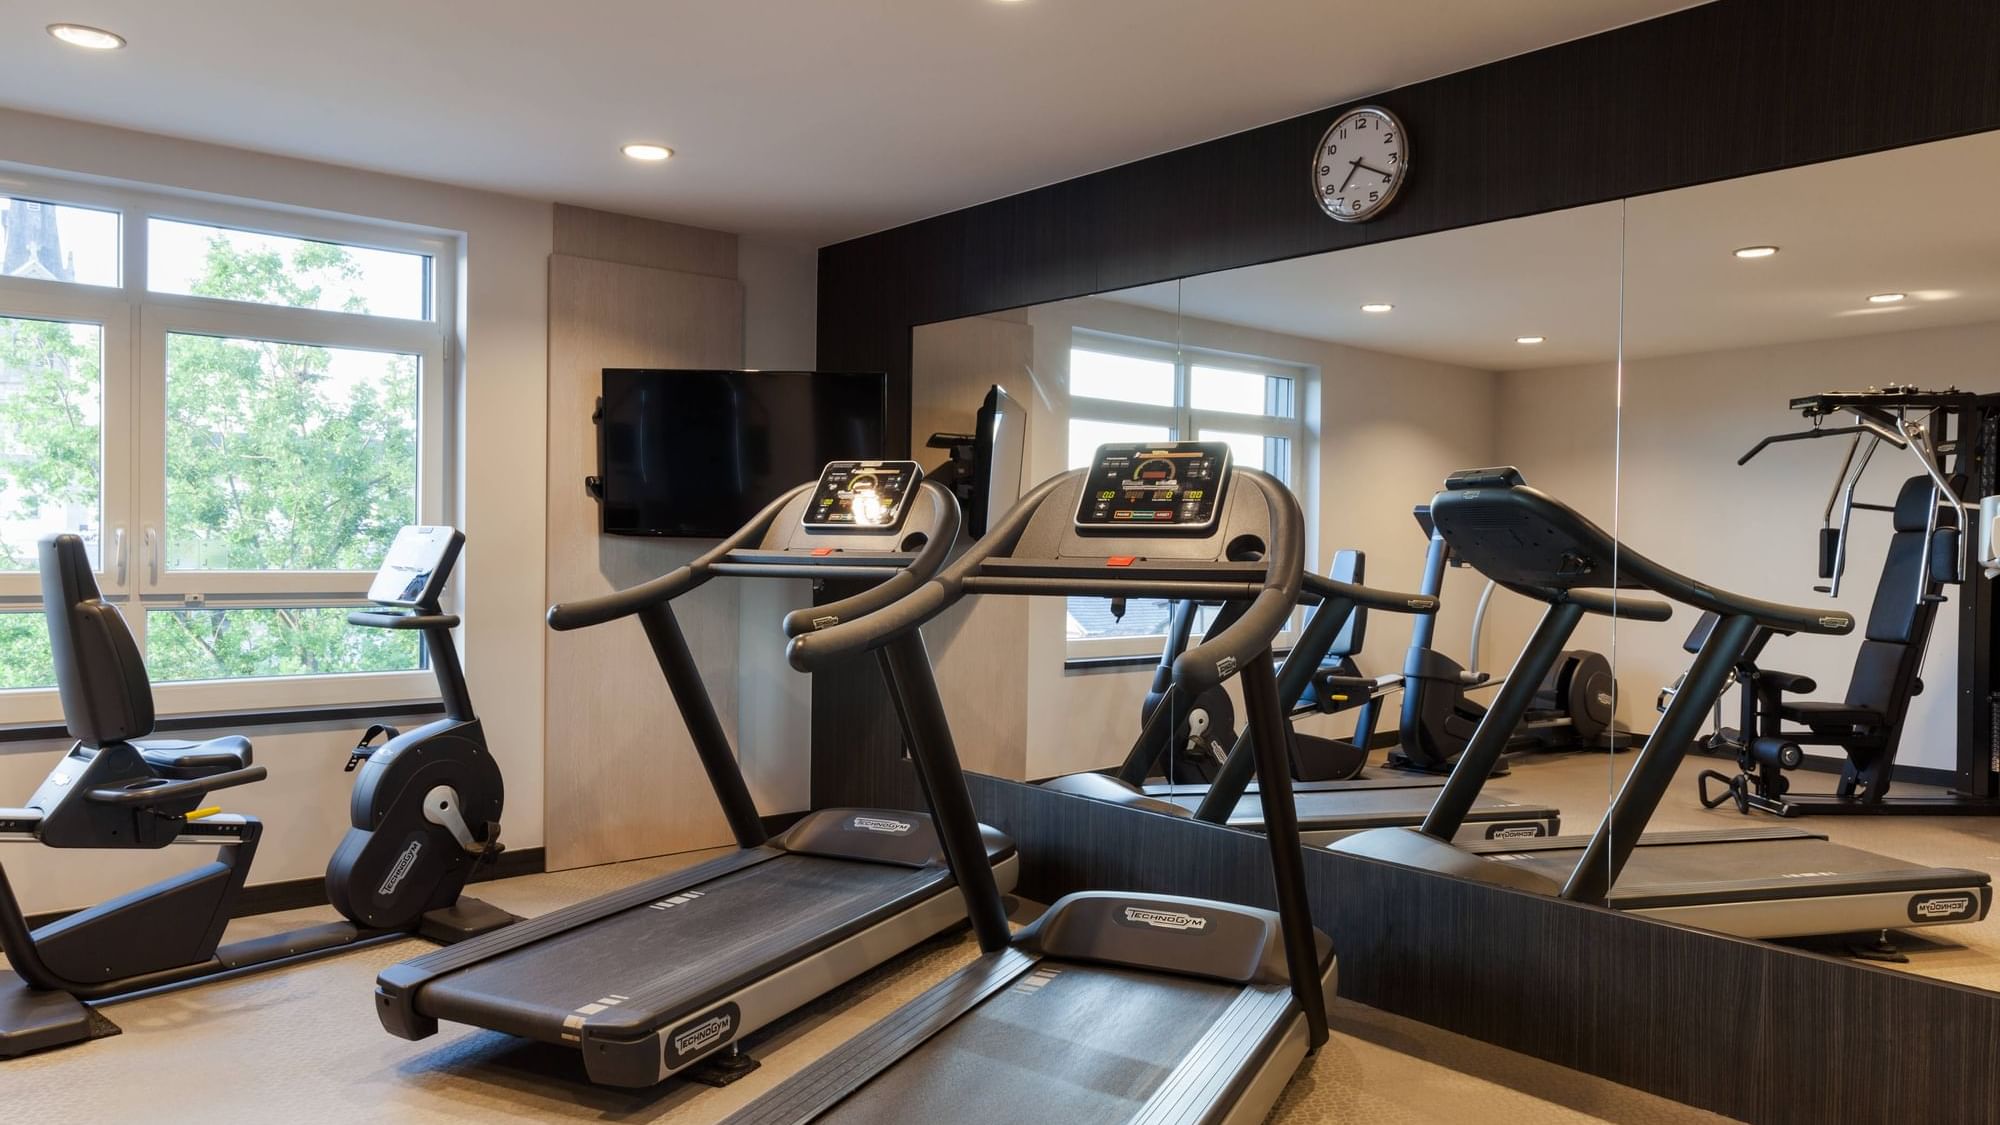 The fully equipped gymnasium at The Originals Hotels